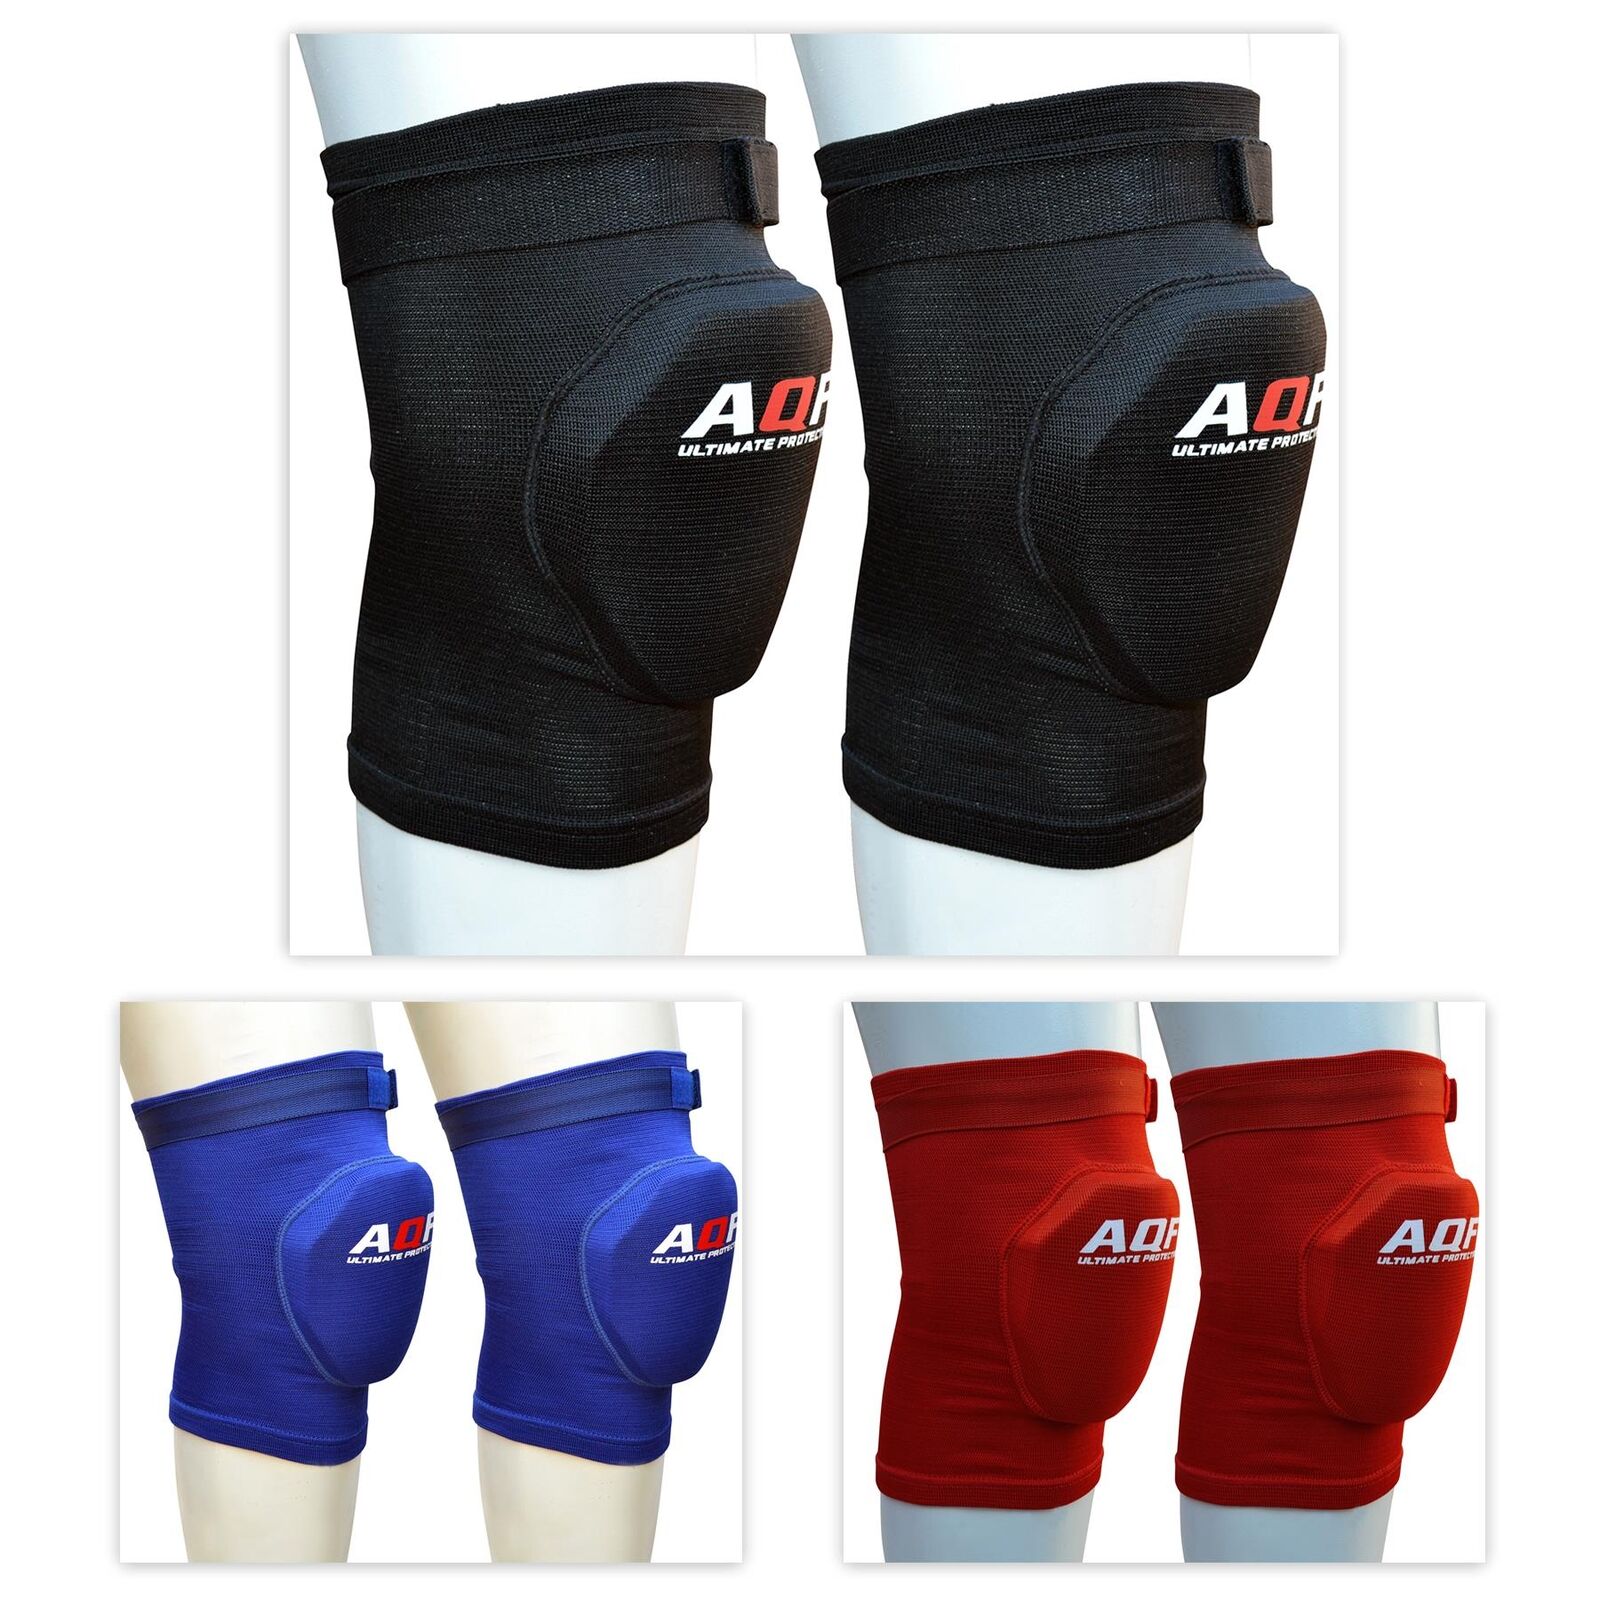 Best Knee Support for Arthritis UK - Knee Pads Brace Protector Caps Support Pad Guards